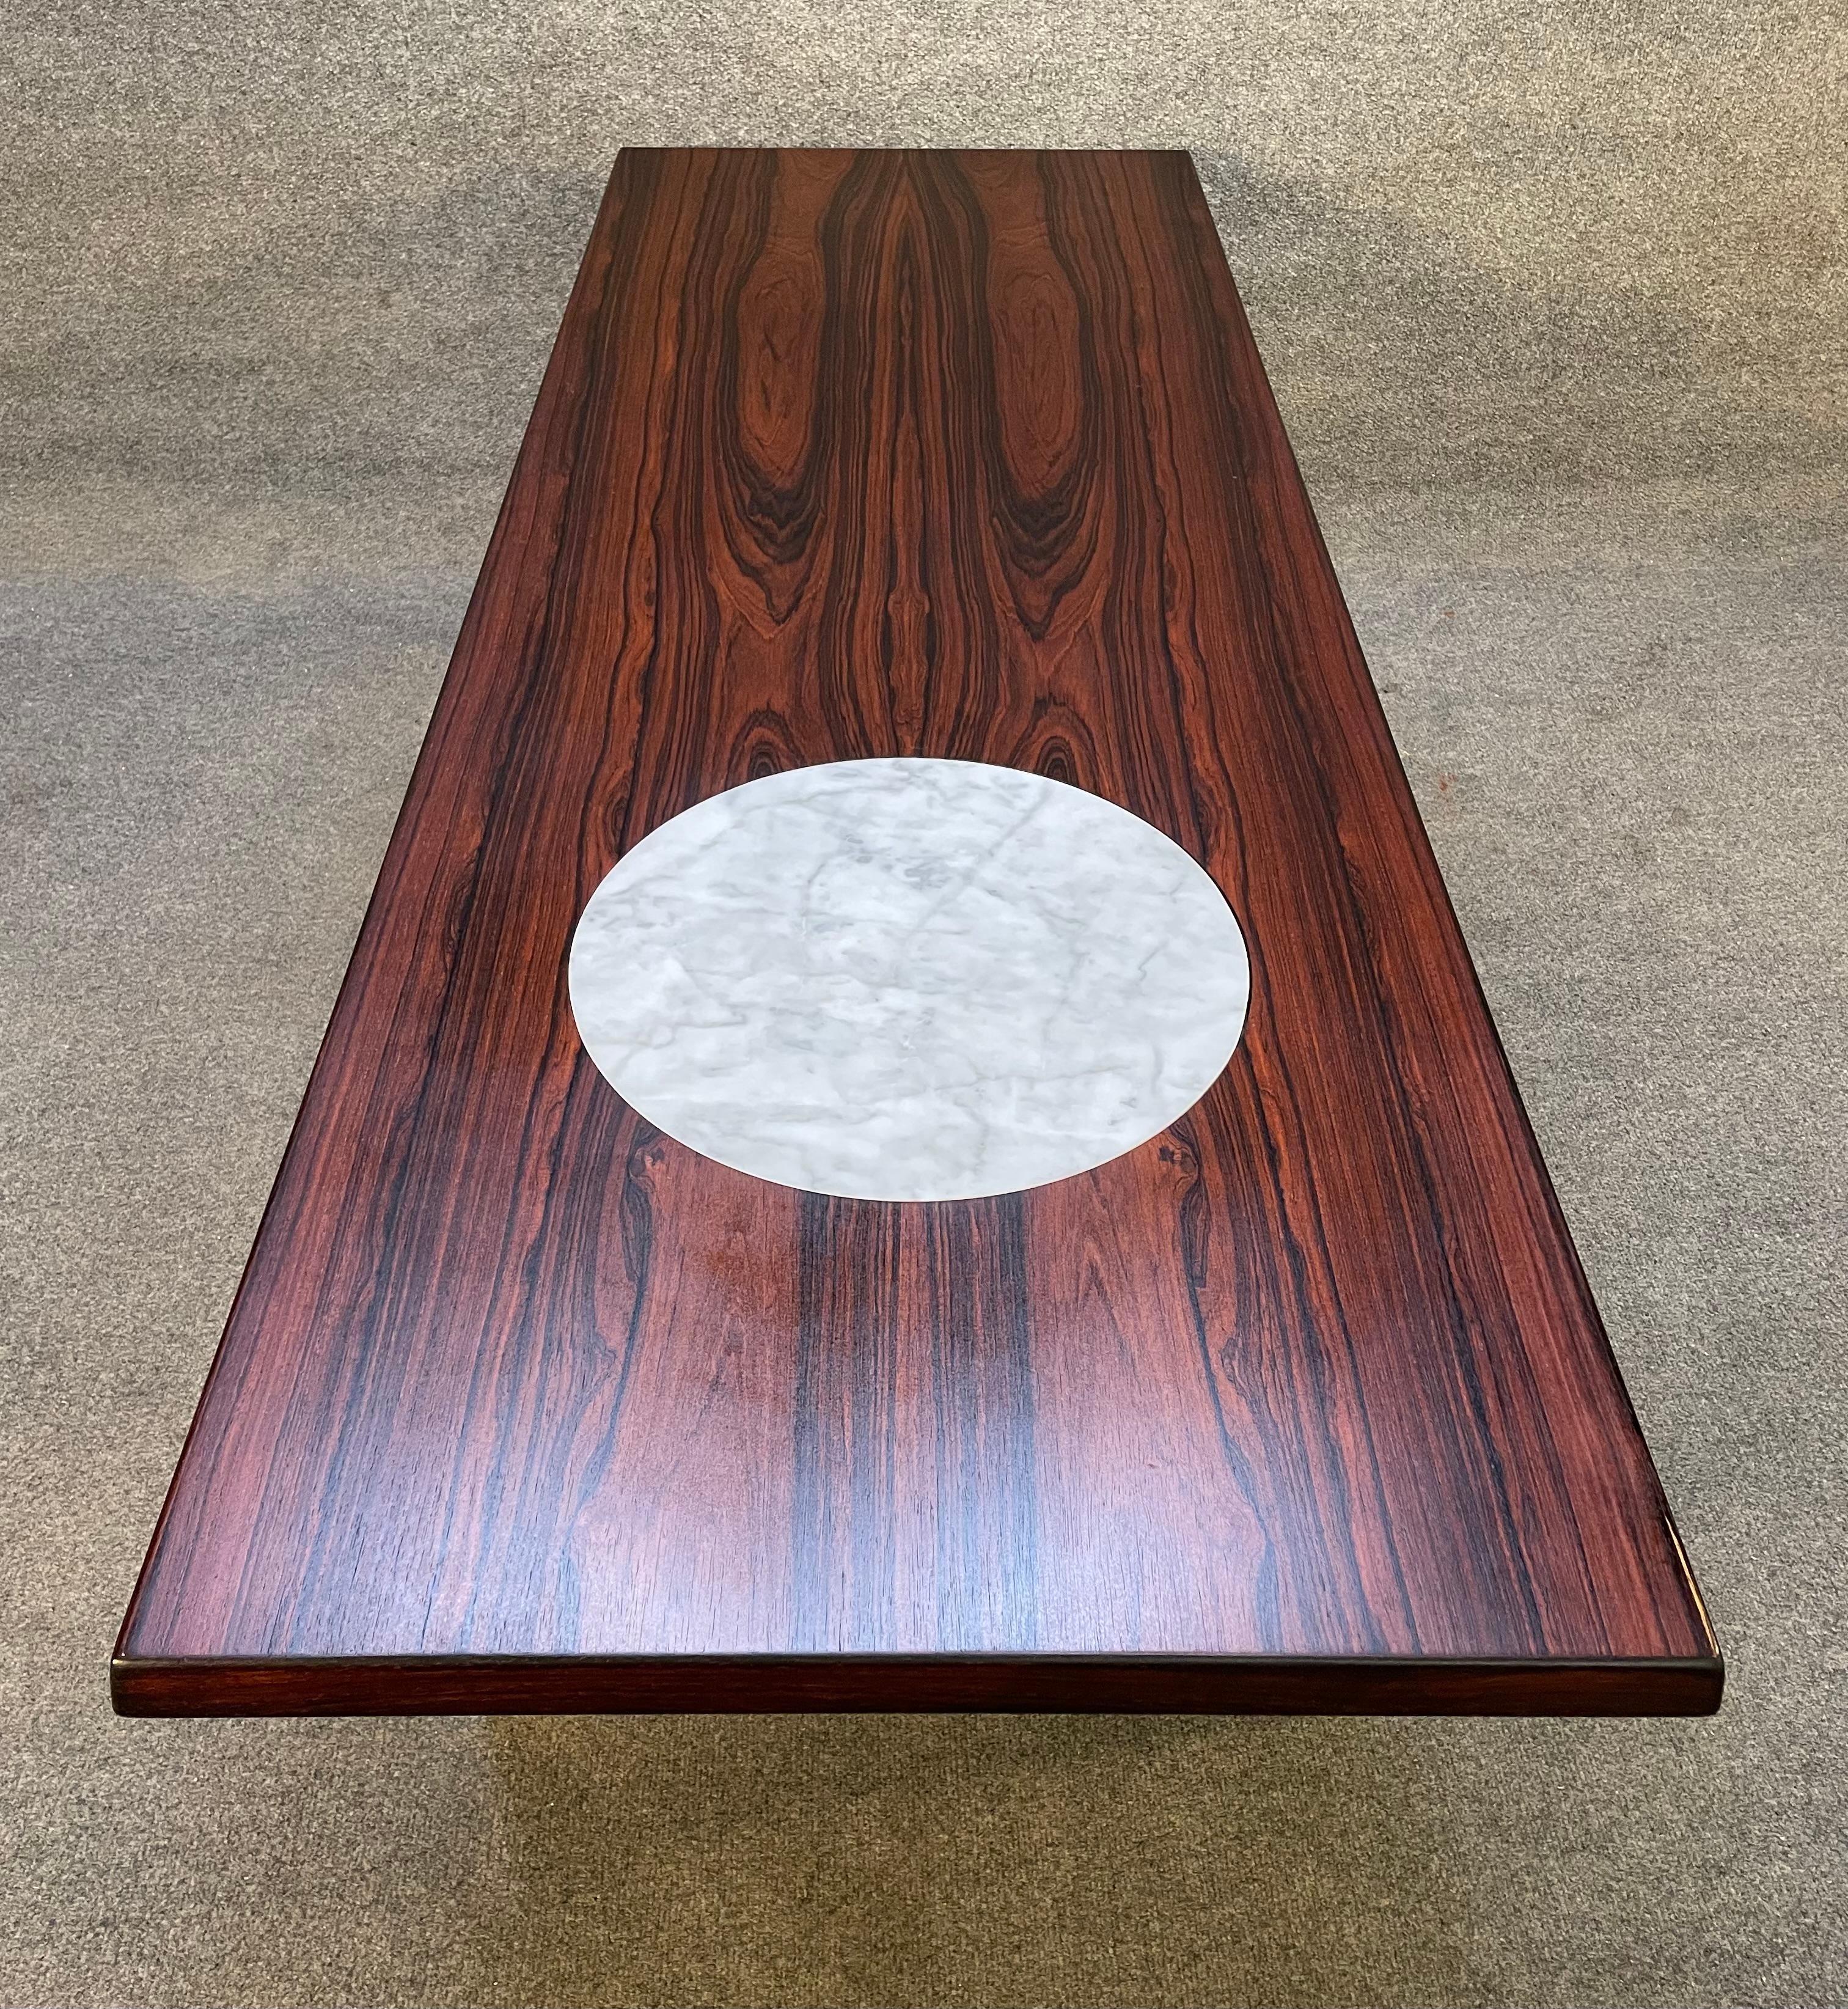 Woodwork Vintage Danish Mid-Century Modern Rosewood and Marble Coffee Table For Sale